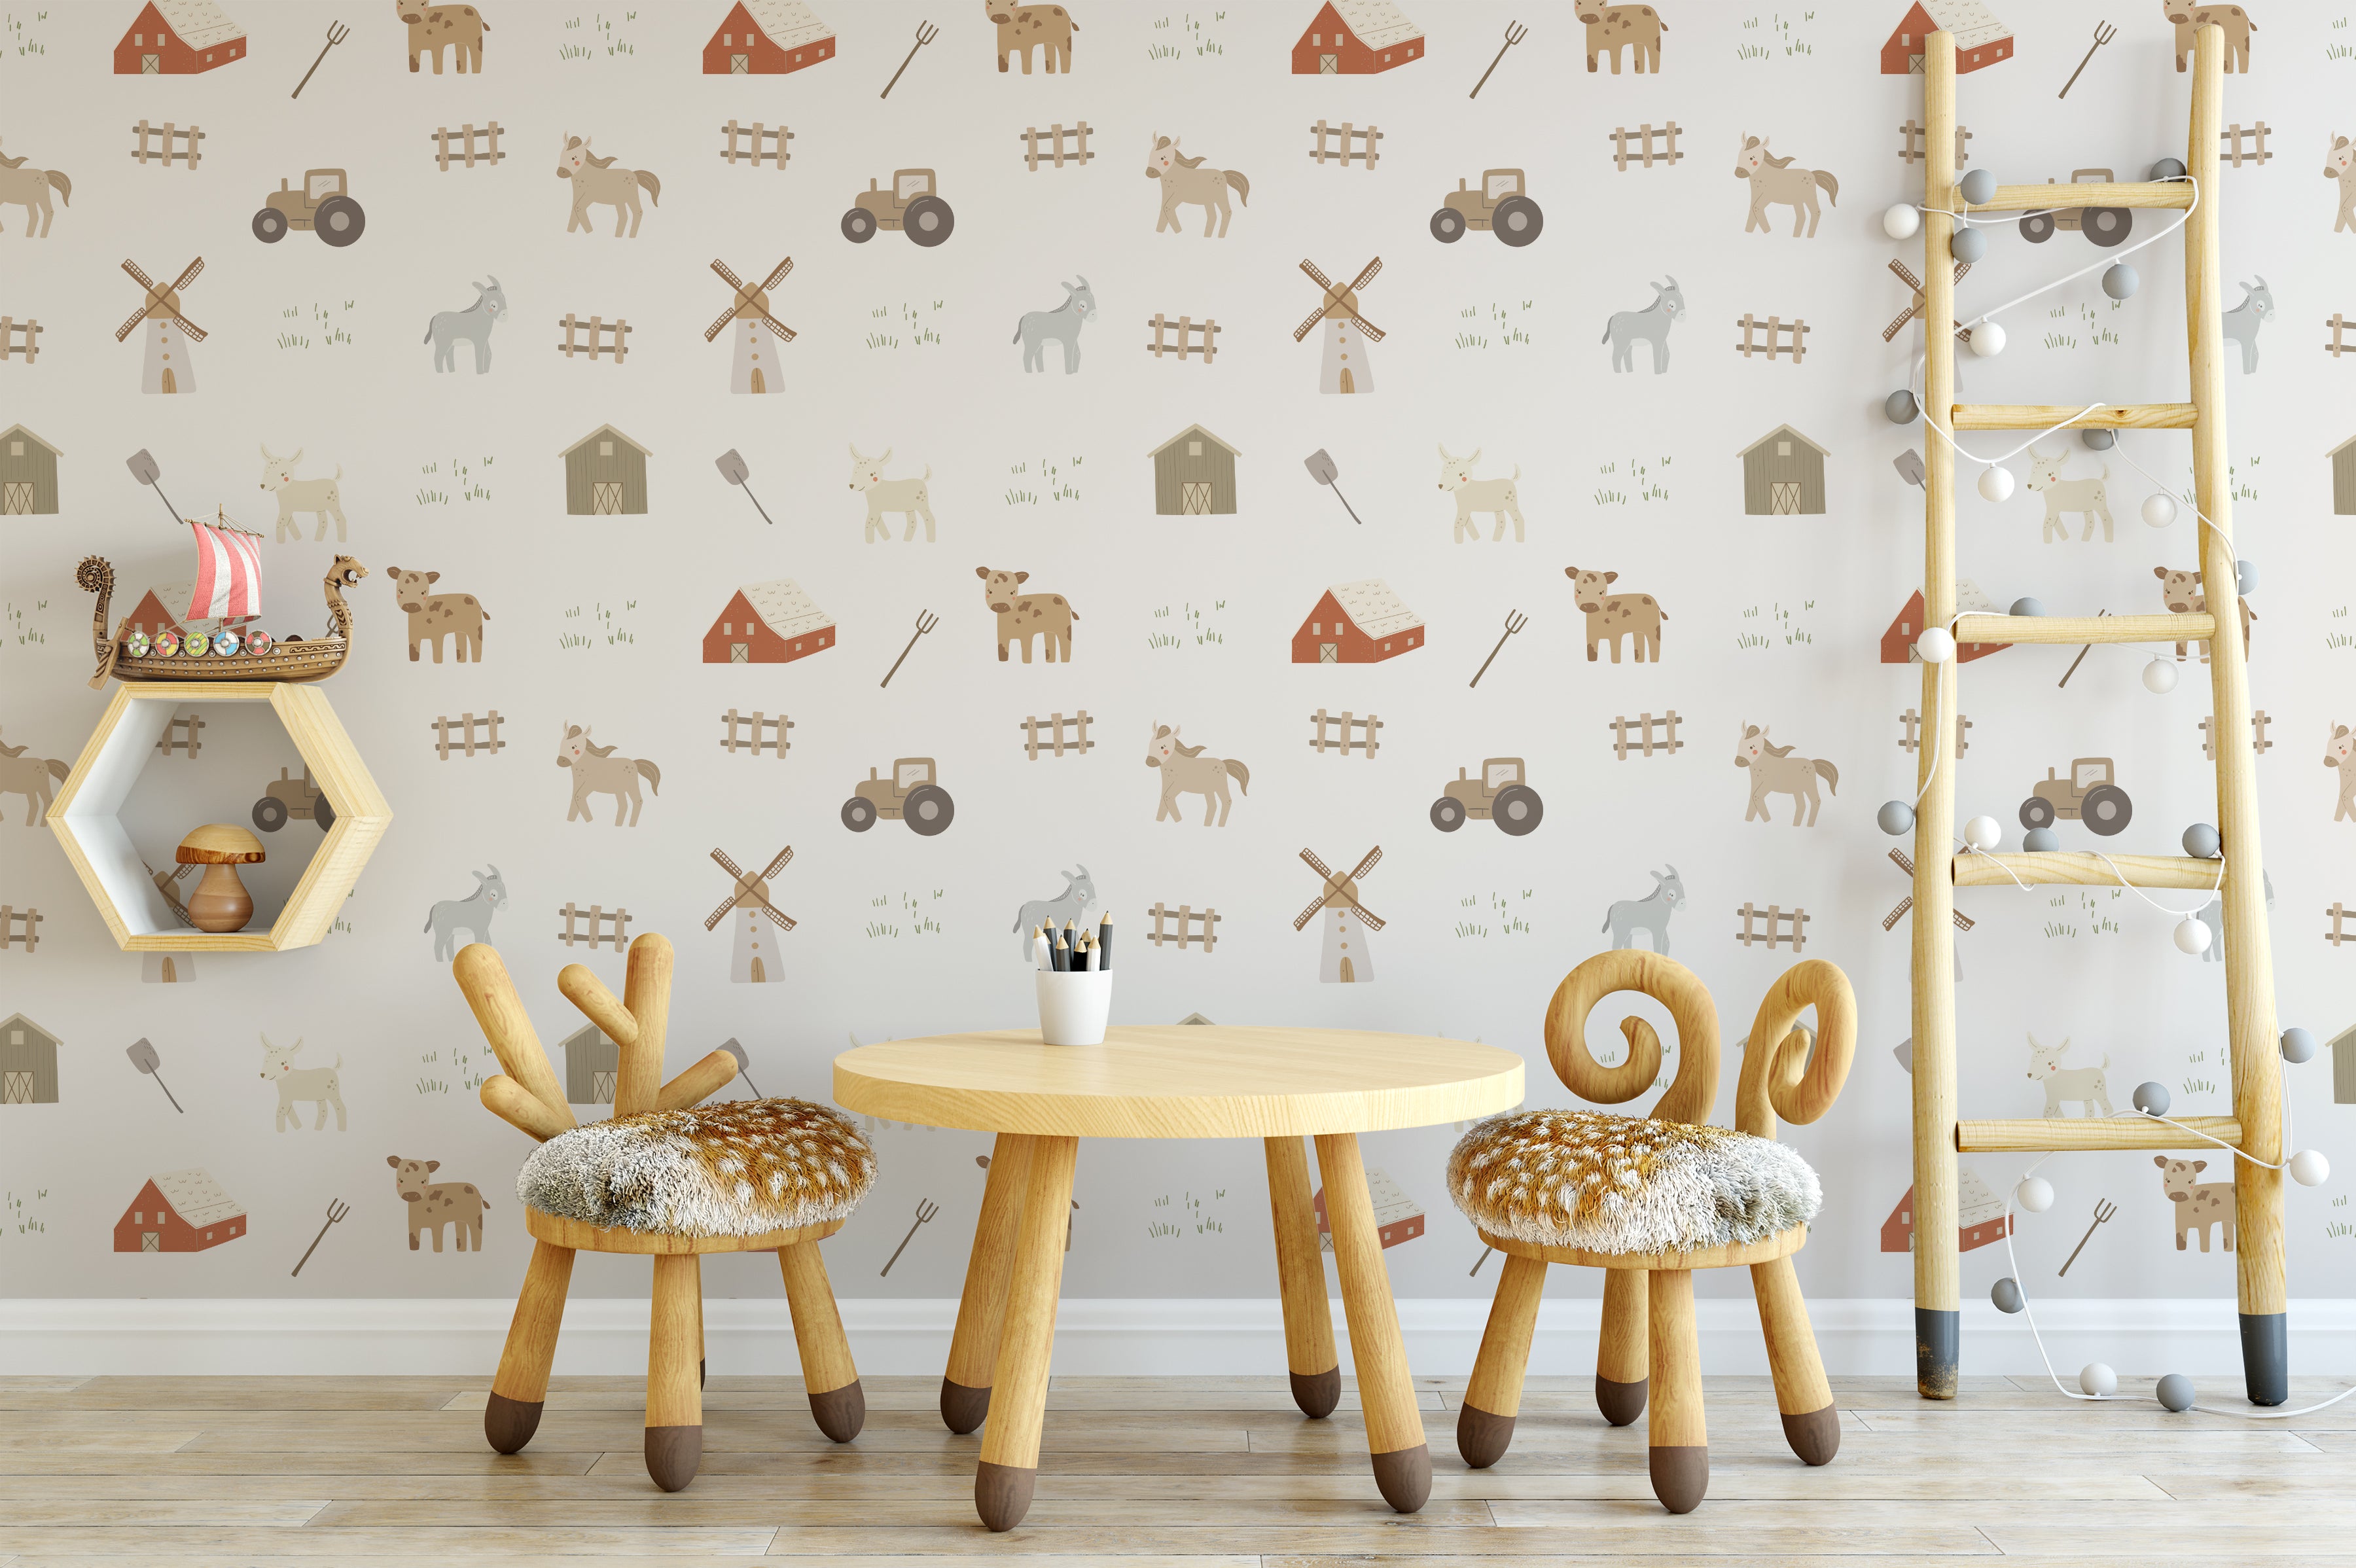 Children's playroom decorated with 'Spring Farm Animals II Wallpaper' featuring a pattern of farm animals, barns, tractors, and windmills in soft earthy tones on a cream background, complemented by wooden furniture and playful decorations.